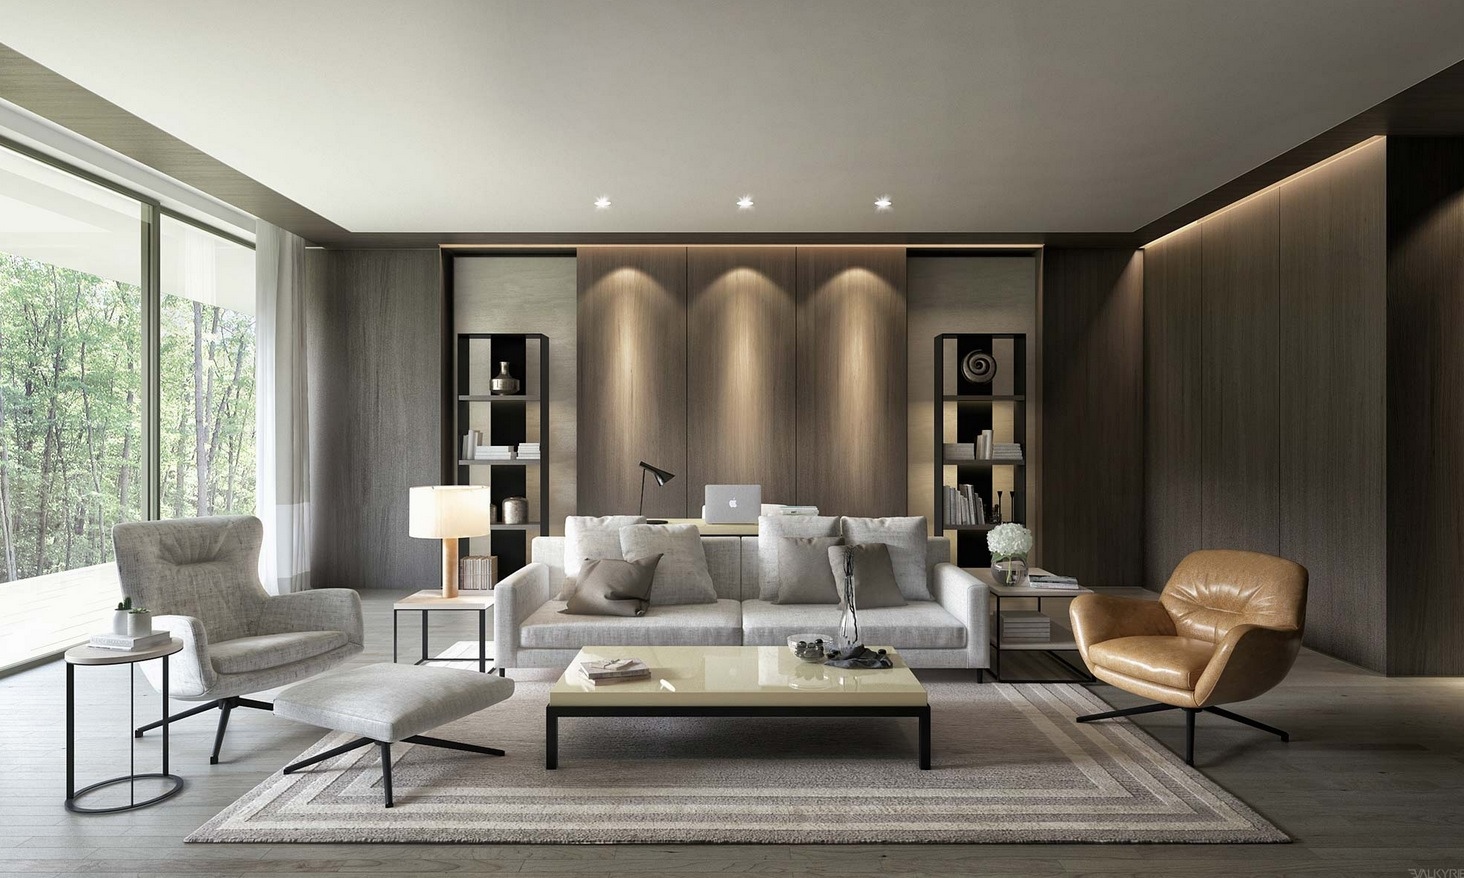 Luxury gray living room decor Luxury gray living room decor "width =" 1464 "height =" 878 "srcset =" https://mileray.com/wp-content/uploads/2020/05/1588517197_967_Decorating-Living-Room-Design-Ideas-With-An-Eclectic-Decor-Looks.jpeg 1464w, https: / /mileray.com/wp-content/uploads/2016/08/Valkyrie-Studio-300x180.jpeg 300w, https://mileray.com/wp-content/uploads/2016/08/Valkyrie-Studio-768x461. jpeg 768w, https://mileray.com/wp-content/uploads/2016/08/Valkyrie-Studio-1024x614.jpeg 1024w, https://mileray.com/wp-content/uploads/2016/08/Valkyrie- Studio-696x417.jpeg 696w, https://mileray.com/wp-content/uploads/2016/08/Valkyrie-Studio-1068x641.jpeg 1068w, https://mileray.com/wp-content/uploads/2016/ 08 / Valkyrie-Studio-700x420.jpeg 700w "sizes =" (maximum width: 1464px) 100vw, 1464px